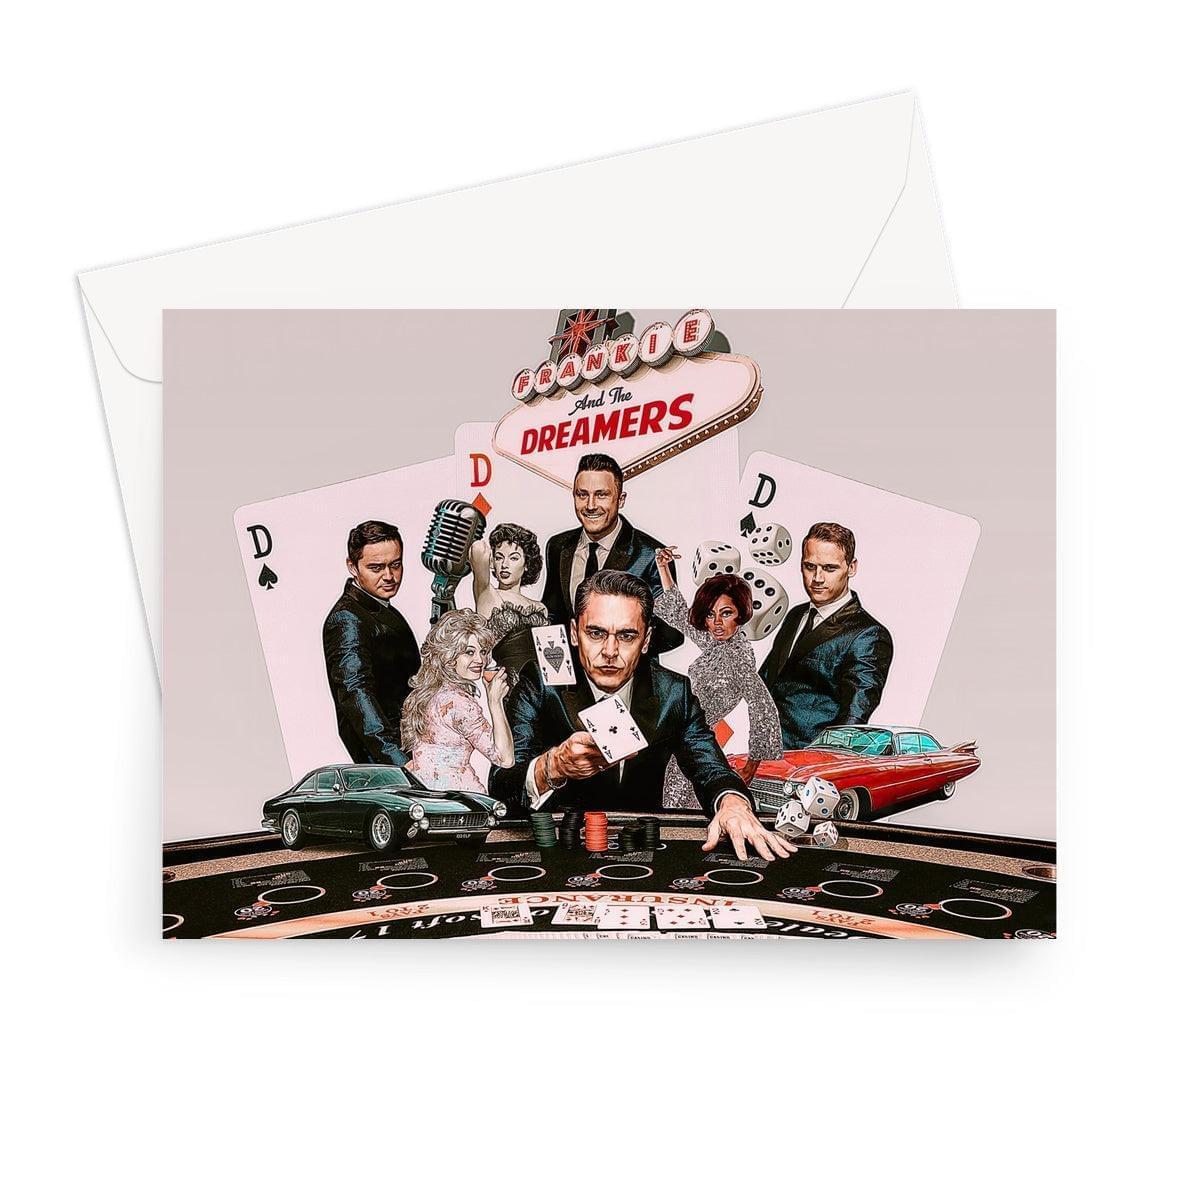 Frankie And The Dreamers Casino Greeting Card | Stationery 7"x5" 1 Card